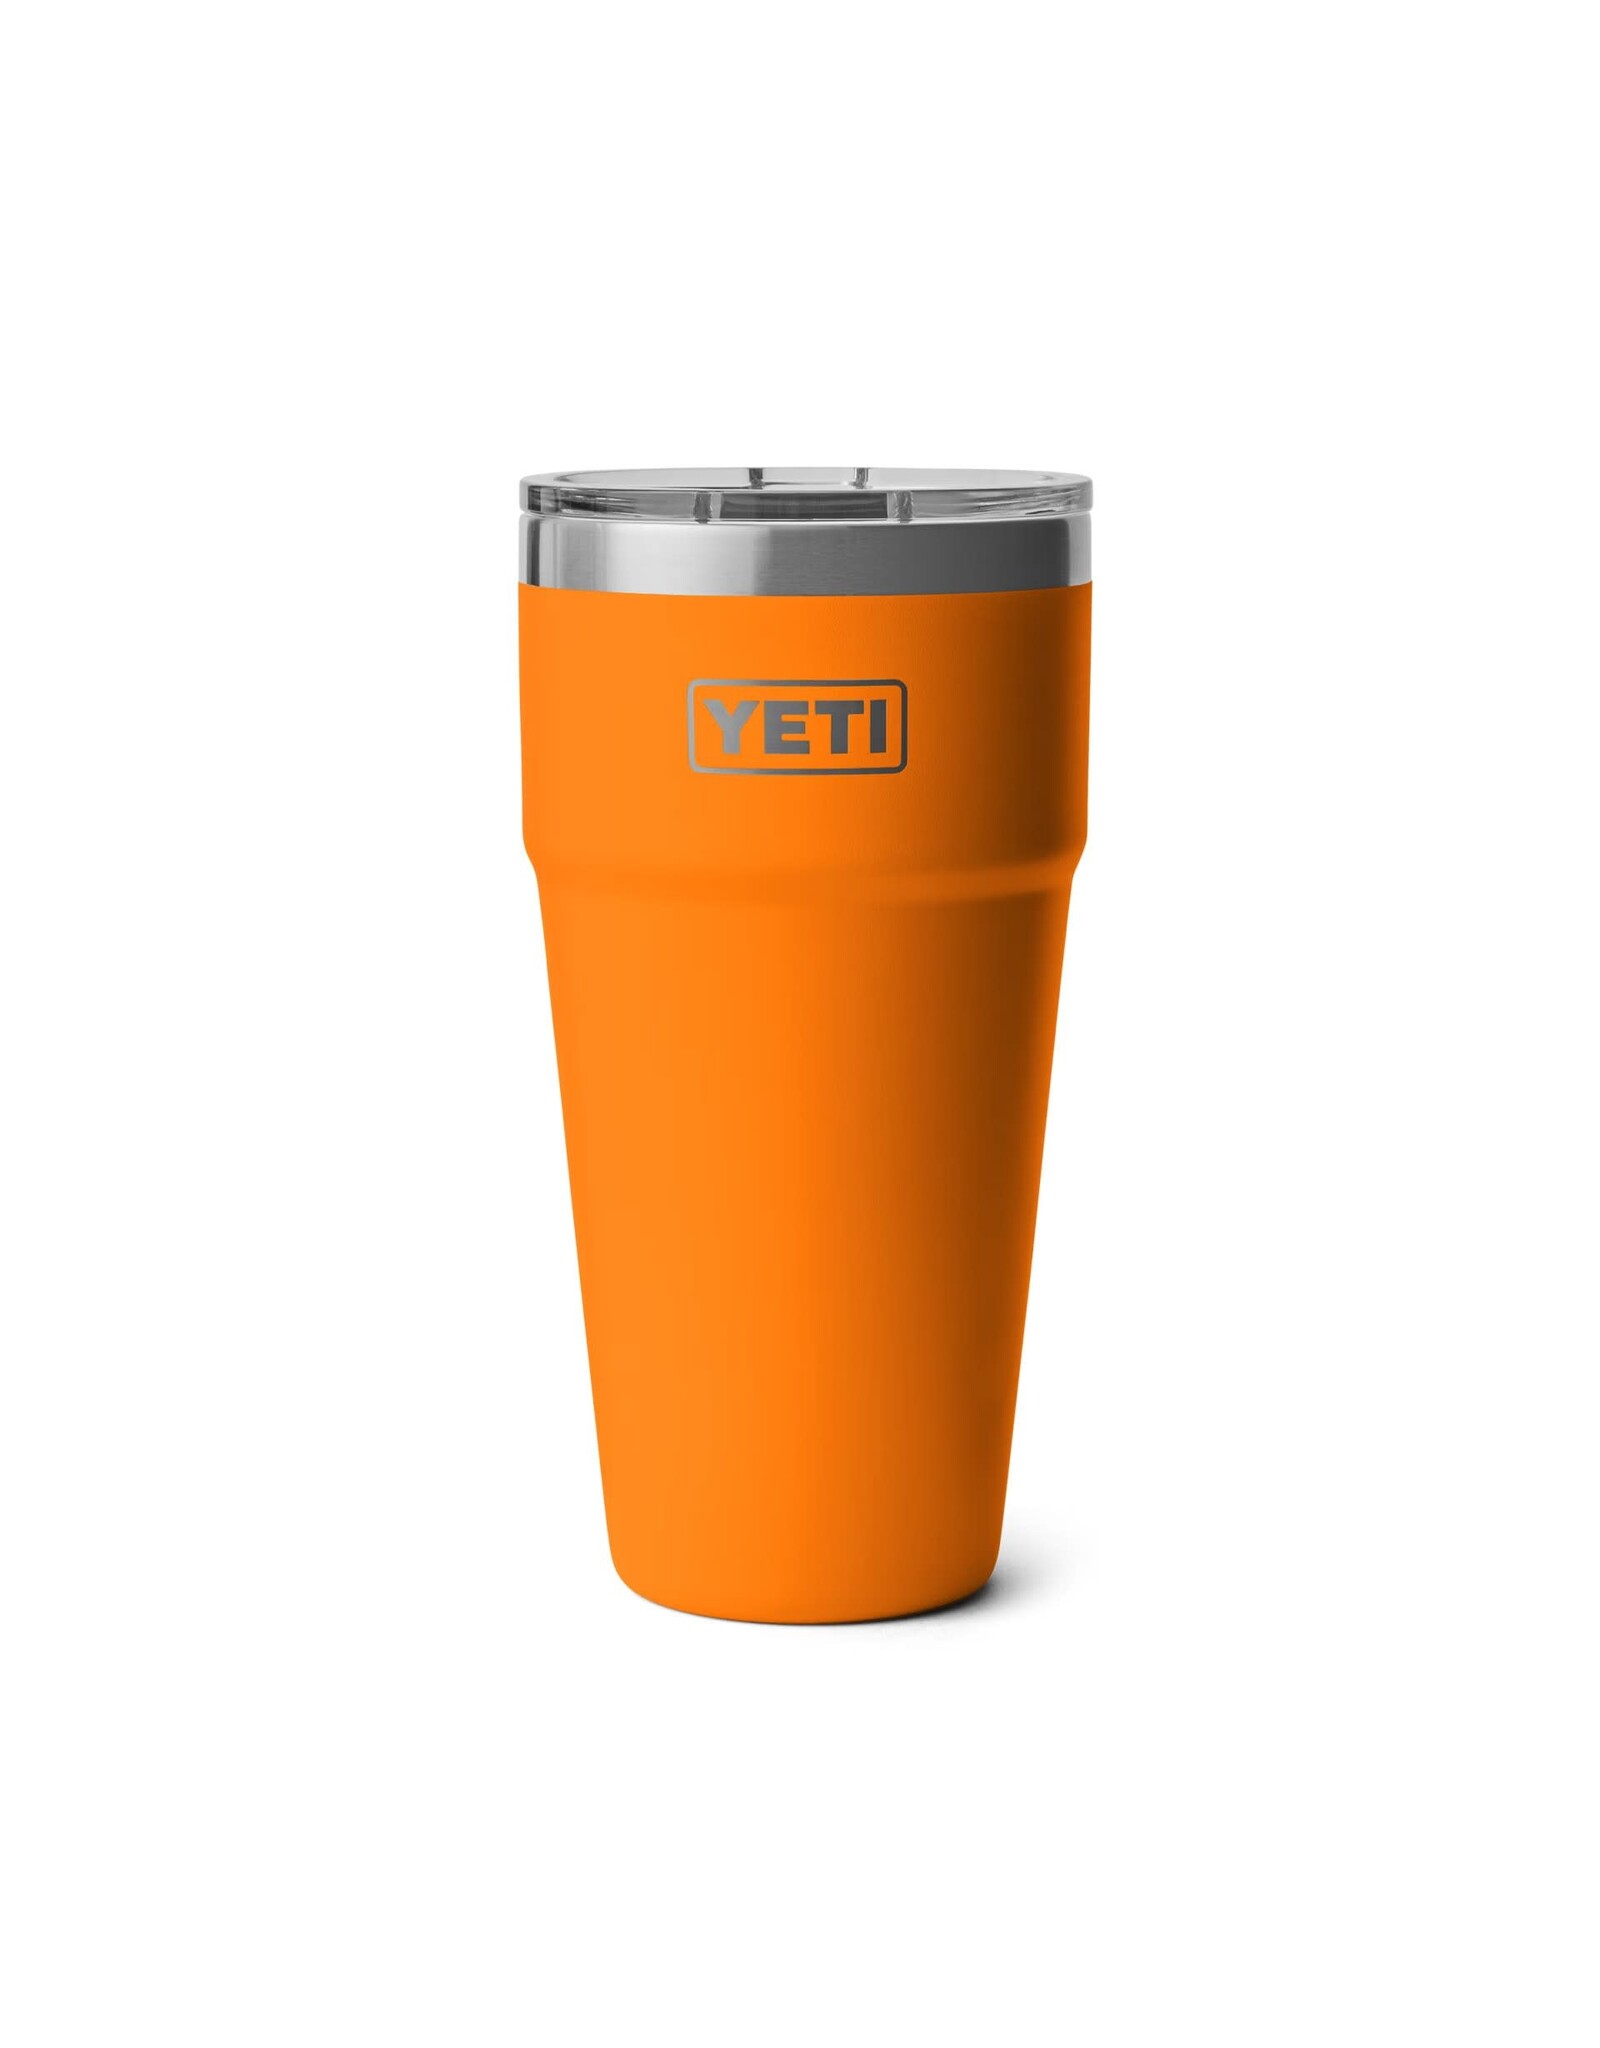 Yeti Yeti Rambler 30oz/887ML Stackable Cup with Magslider Lid